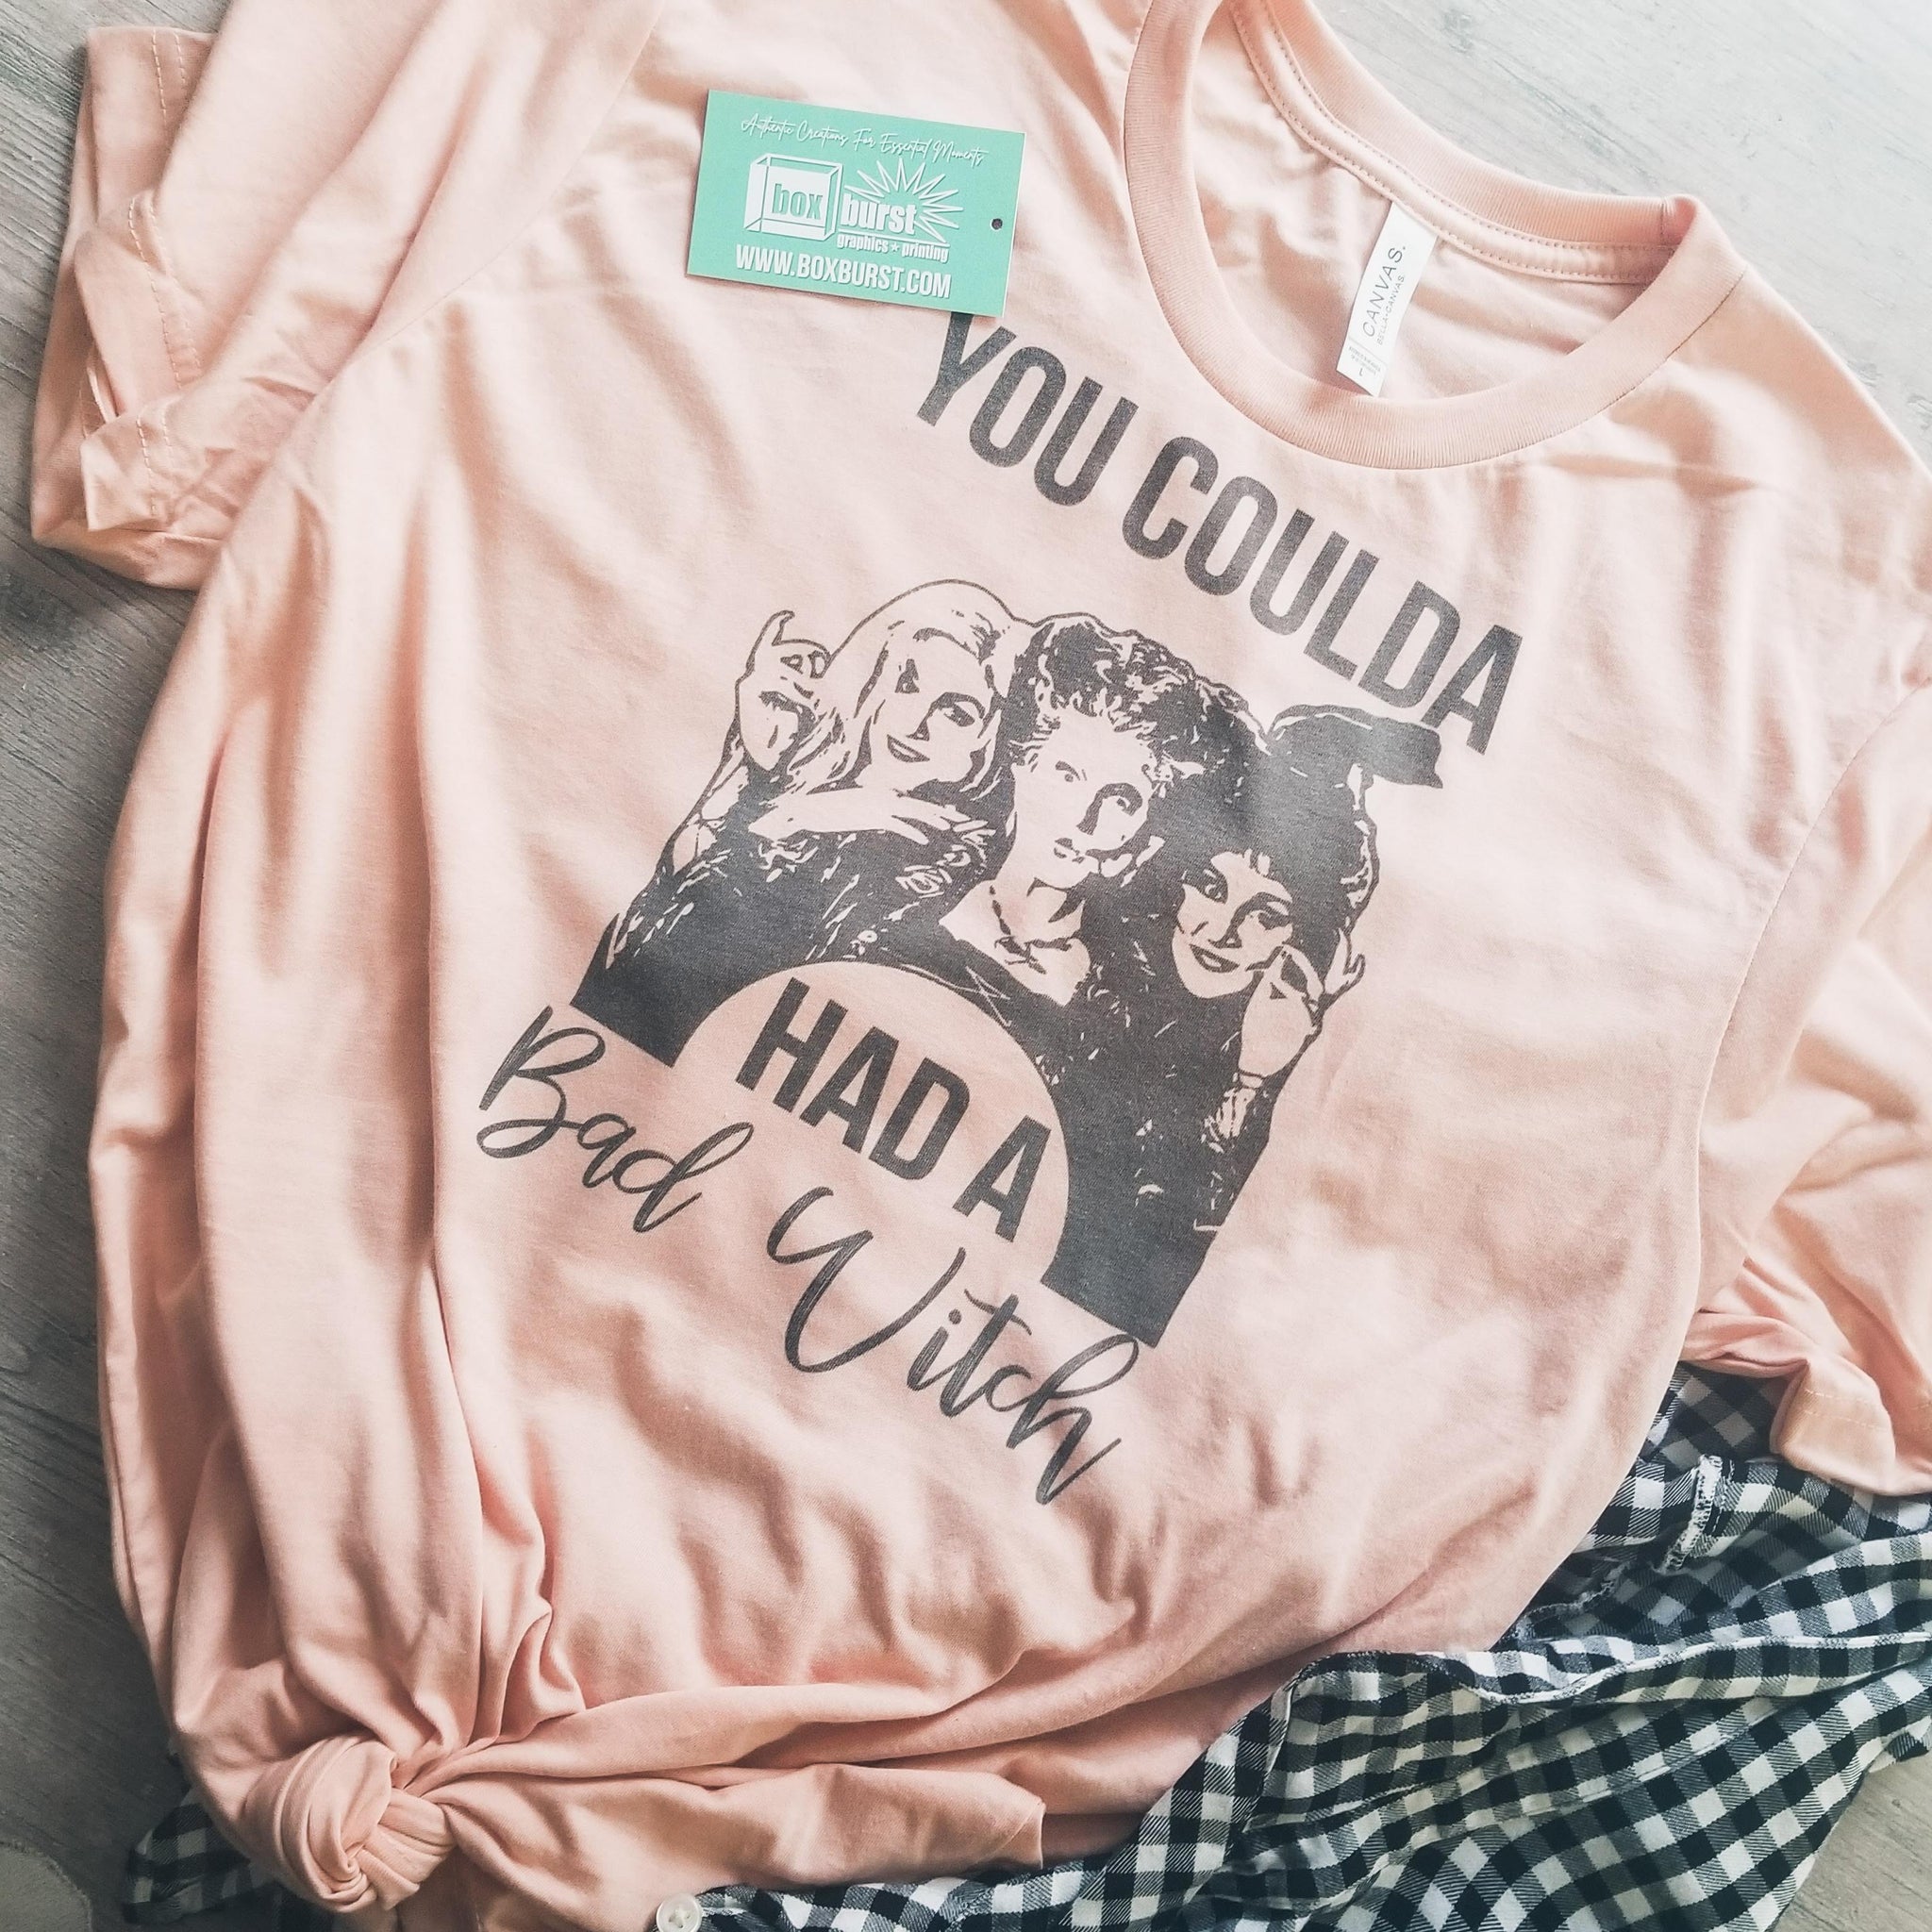 You coulda had a bad witch bella canvas tee ink print